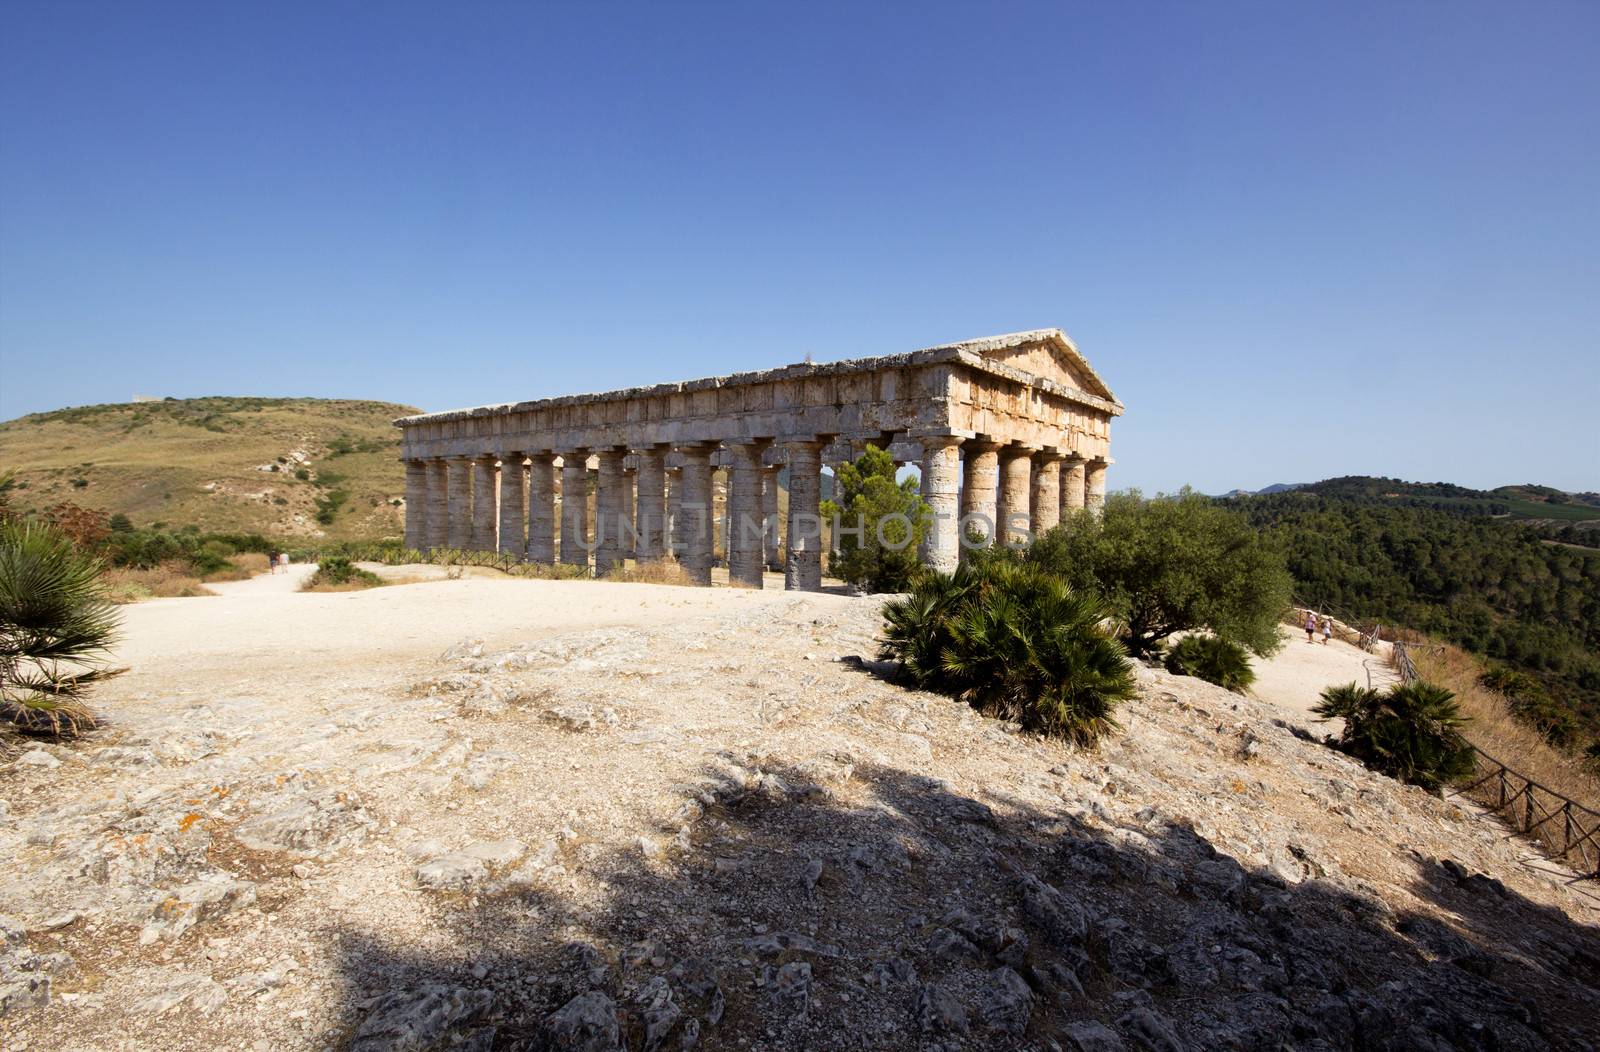 The Doric temple of Segesta by olliemt